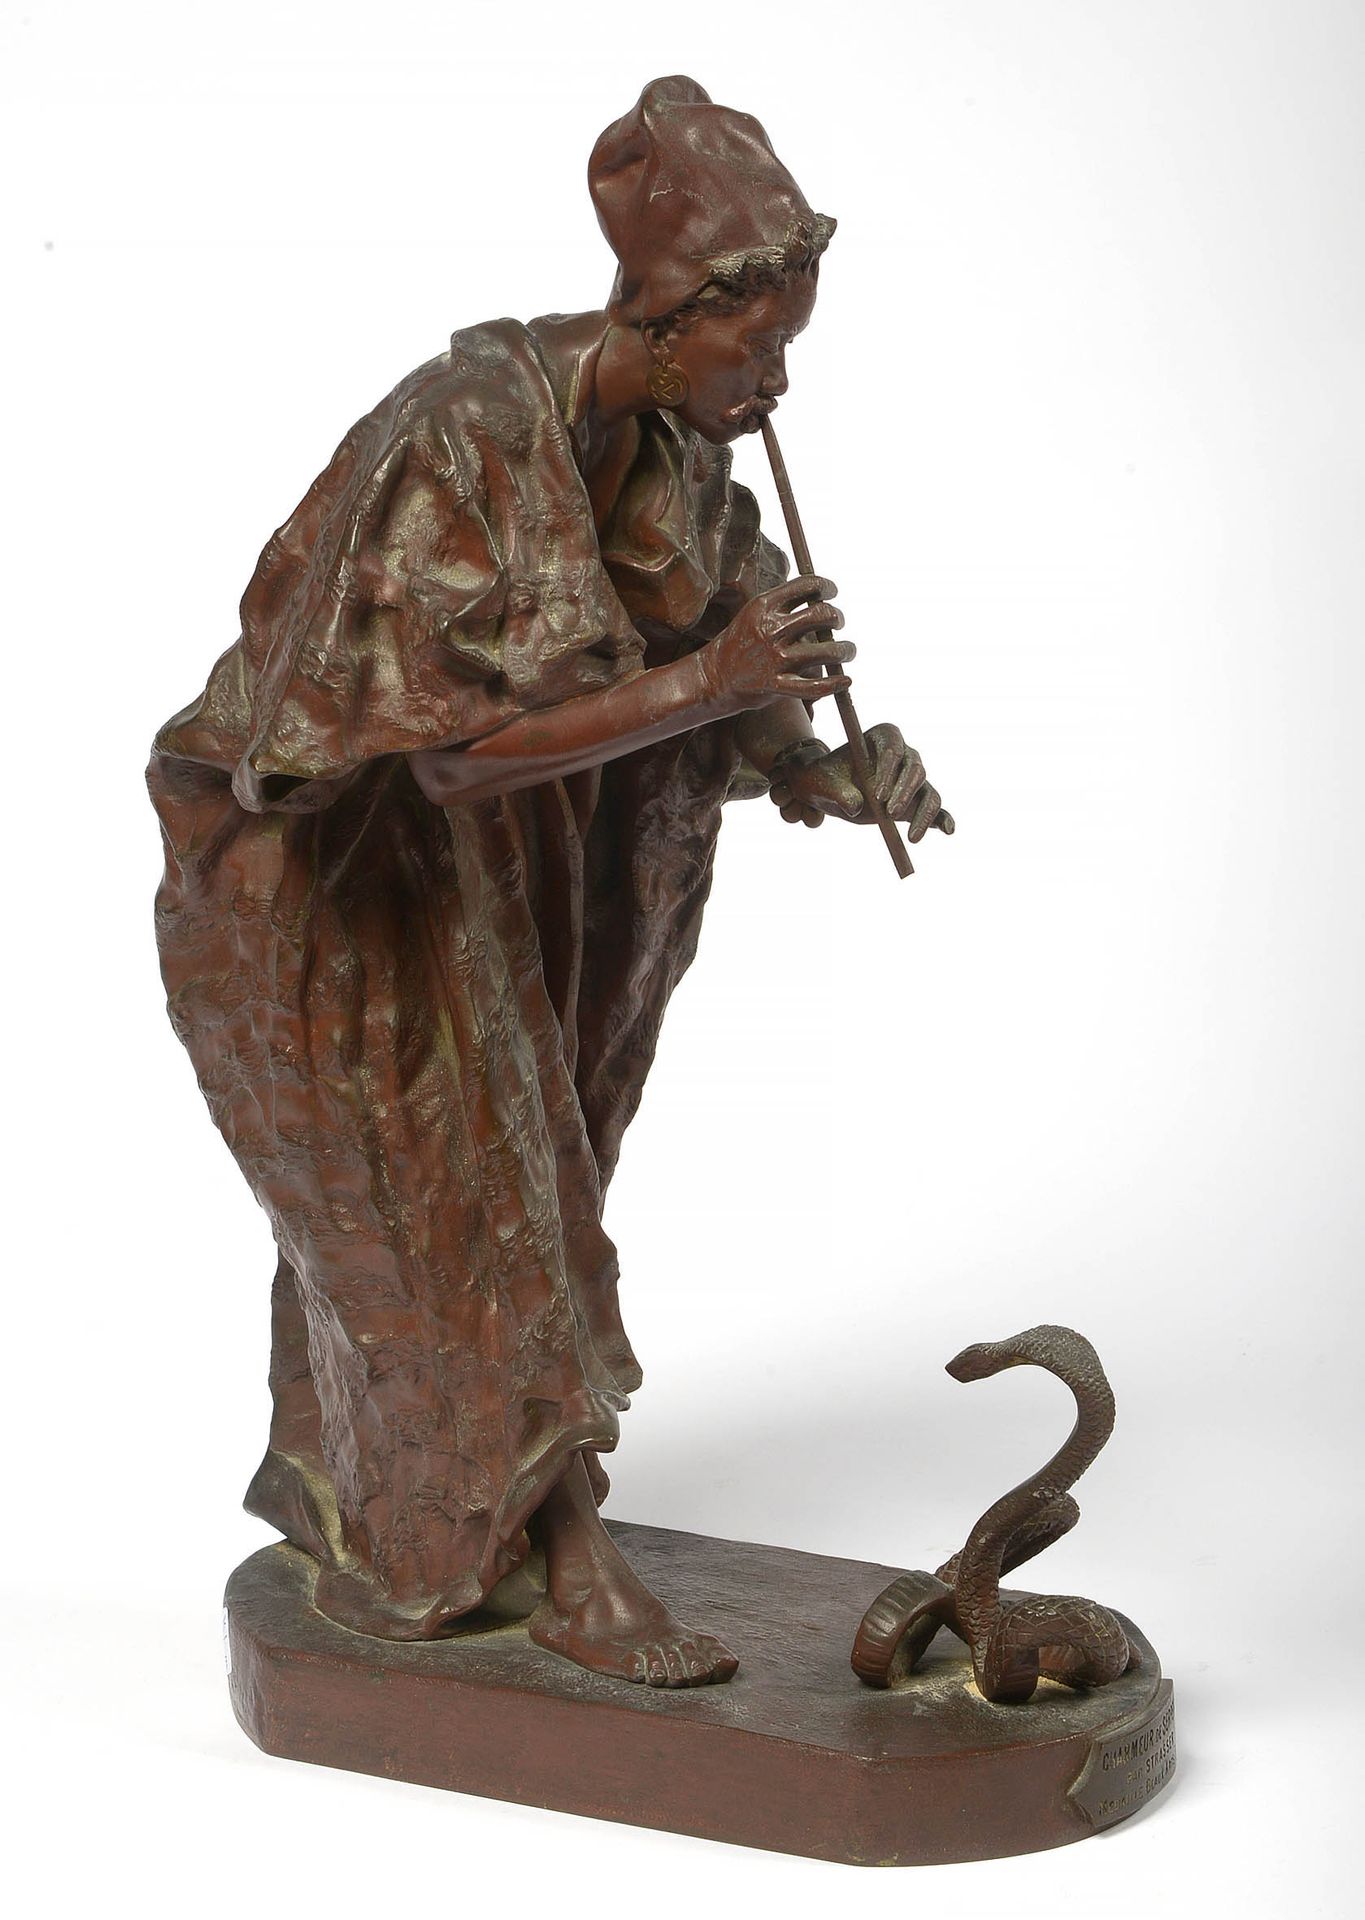 STRASSER Arthur (1854 - 1927) "The snake charmer" in bronze with brown patina. S&hellip;